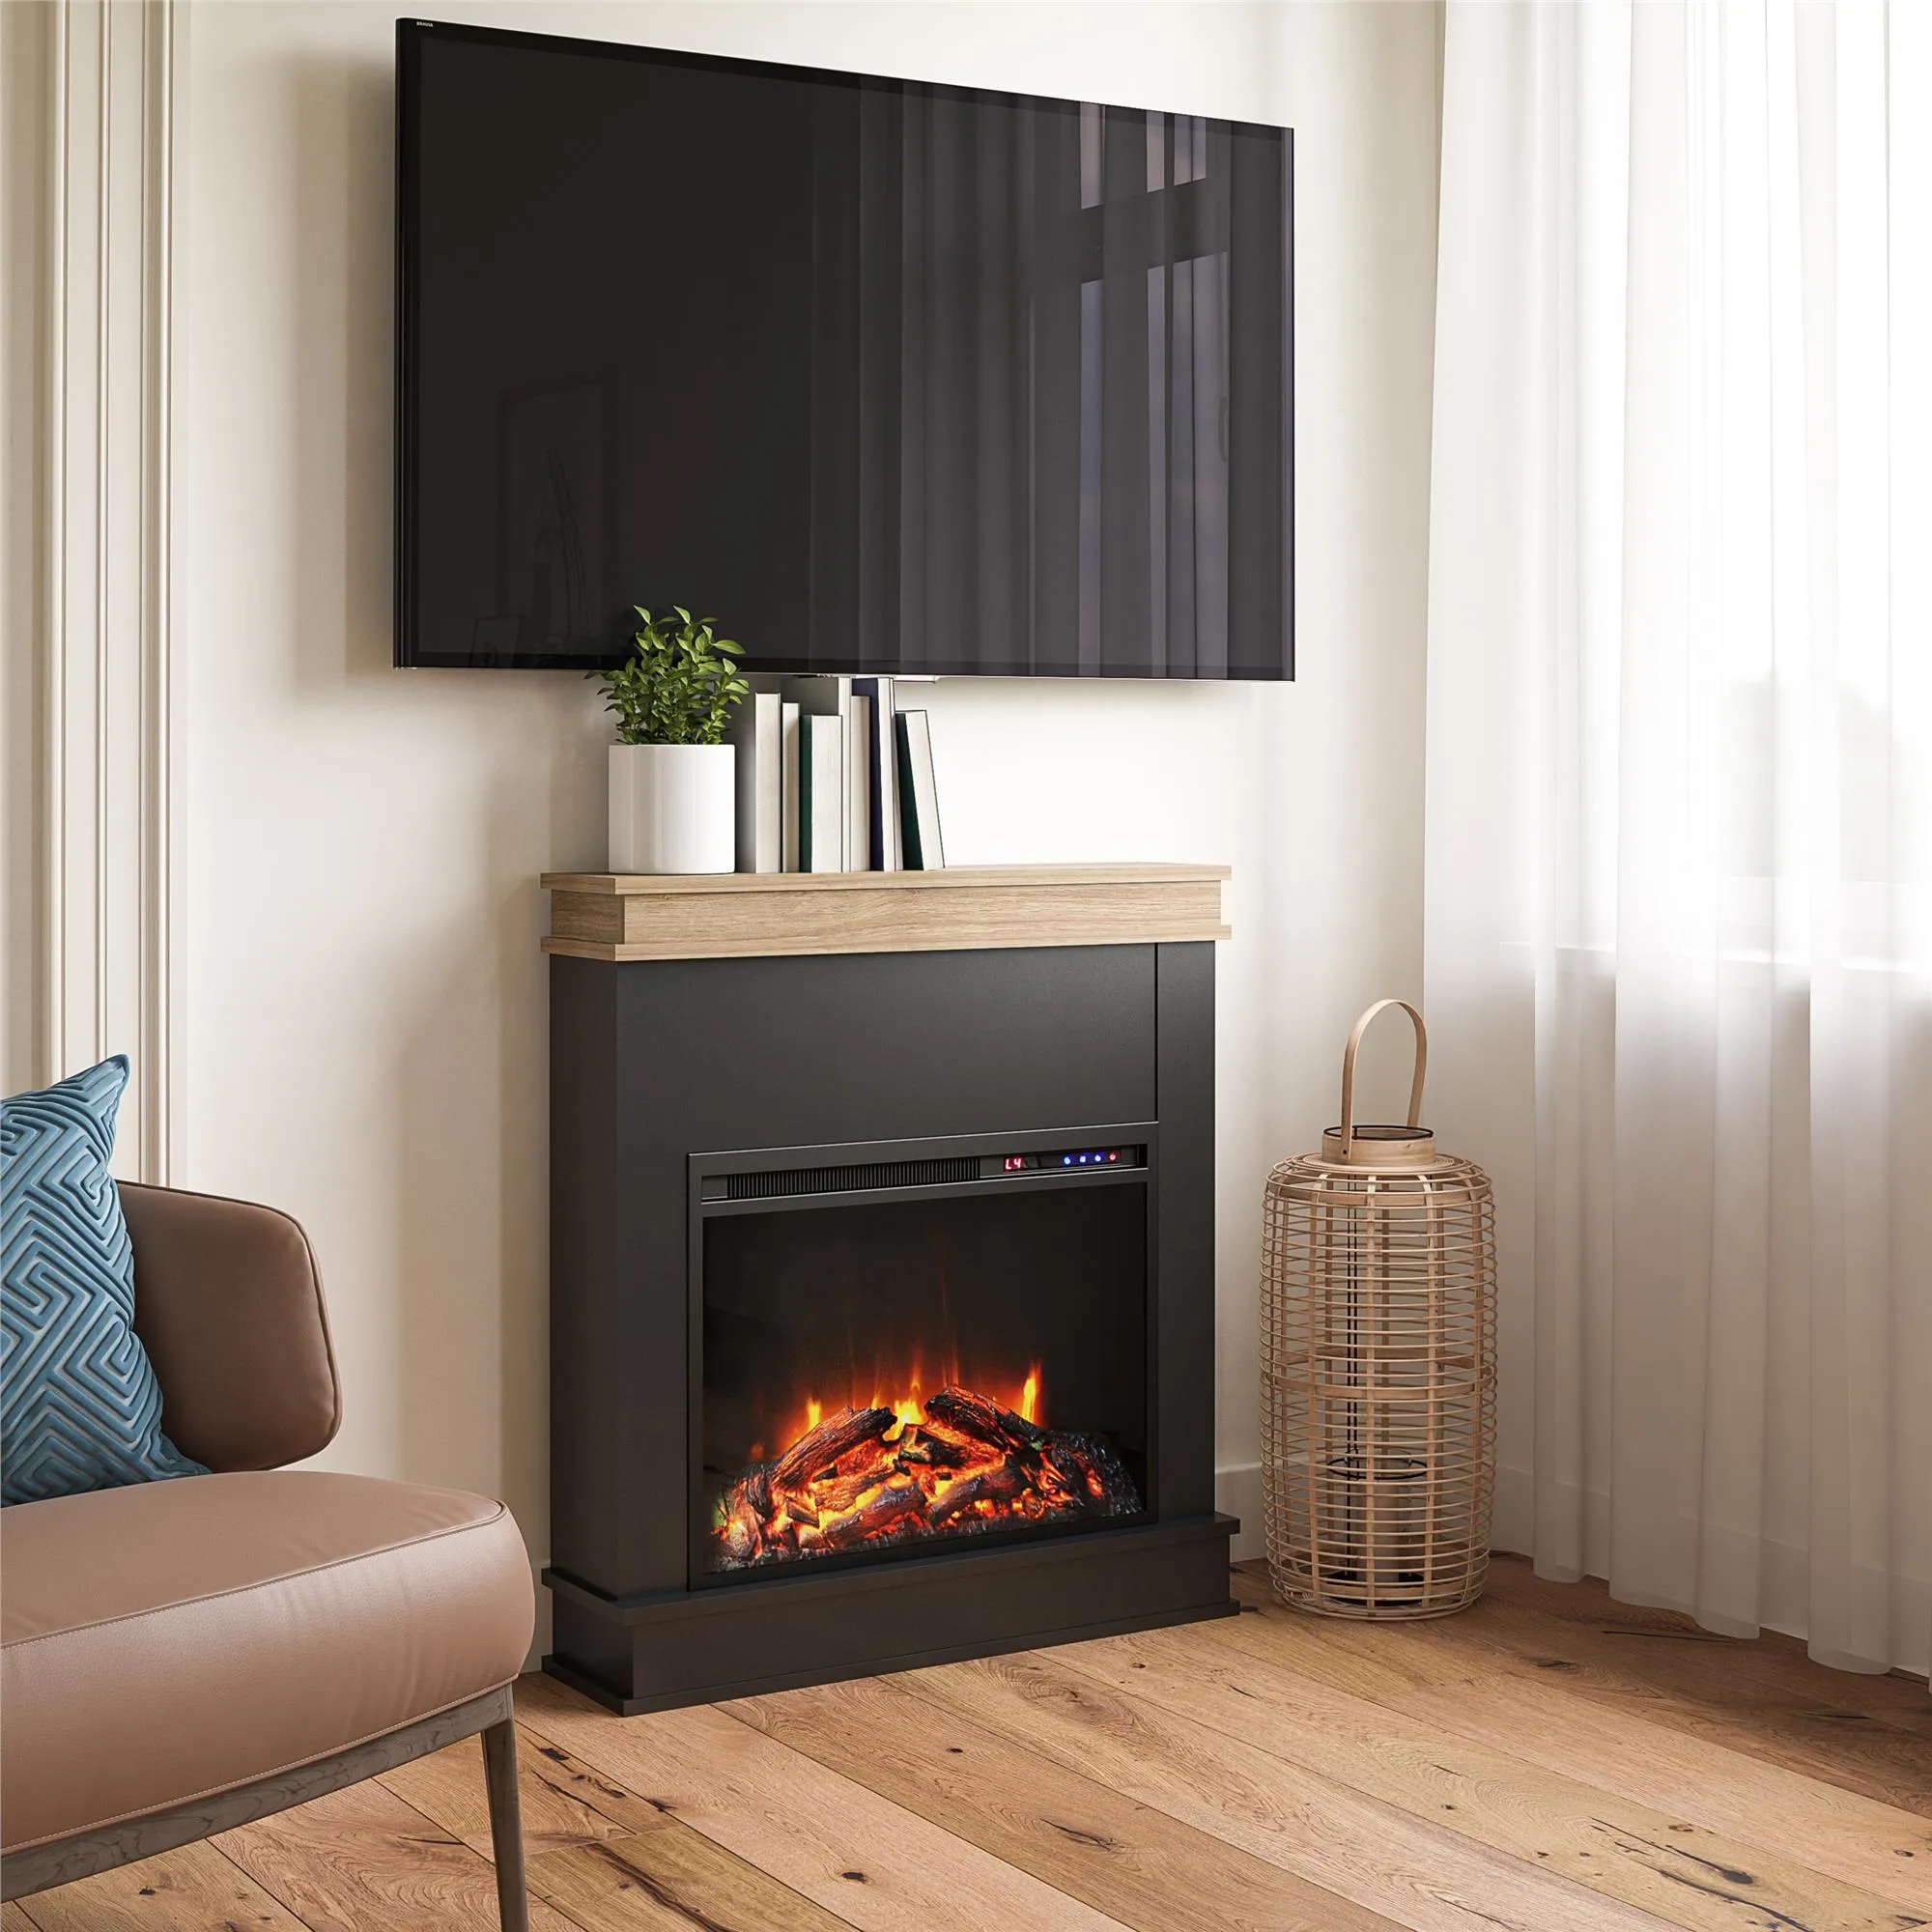 Mateo Electric Fireplace with Mantel and Touchscreen Display, Black with Natural Mantel